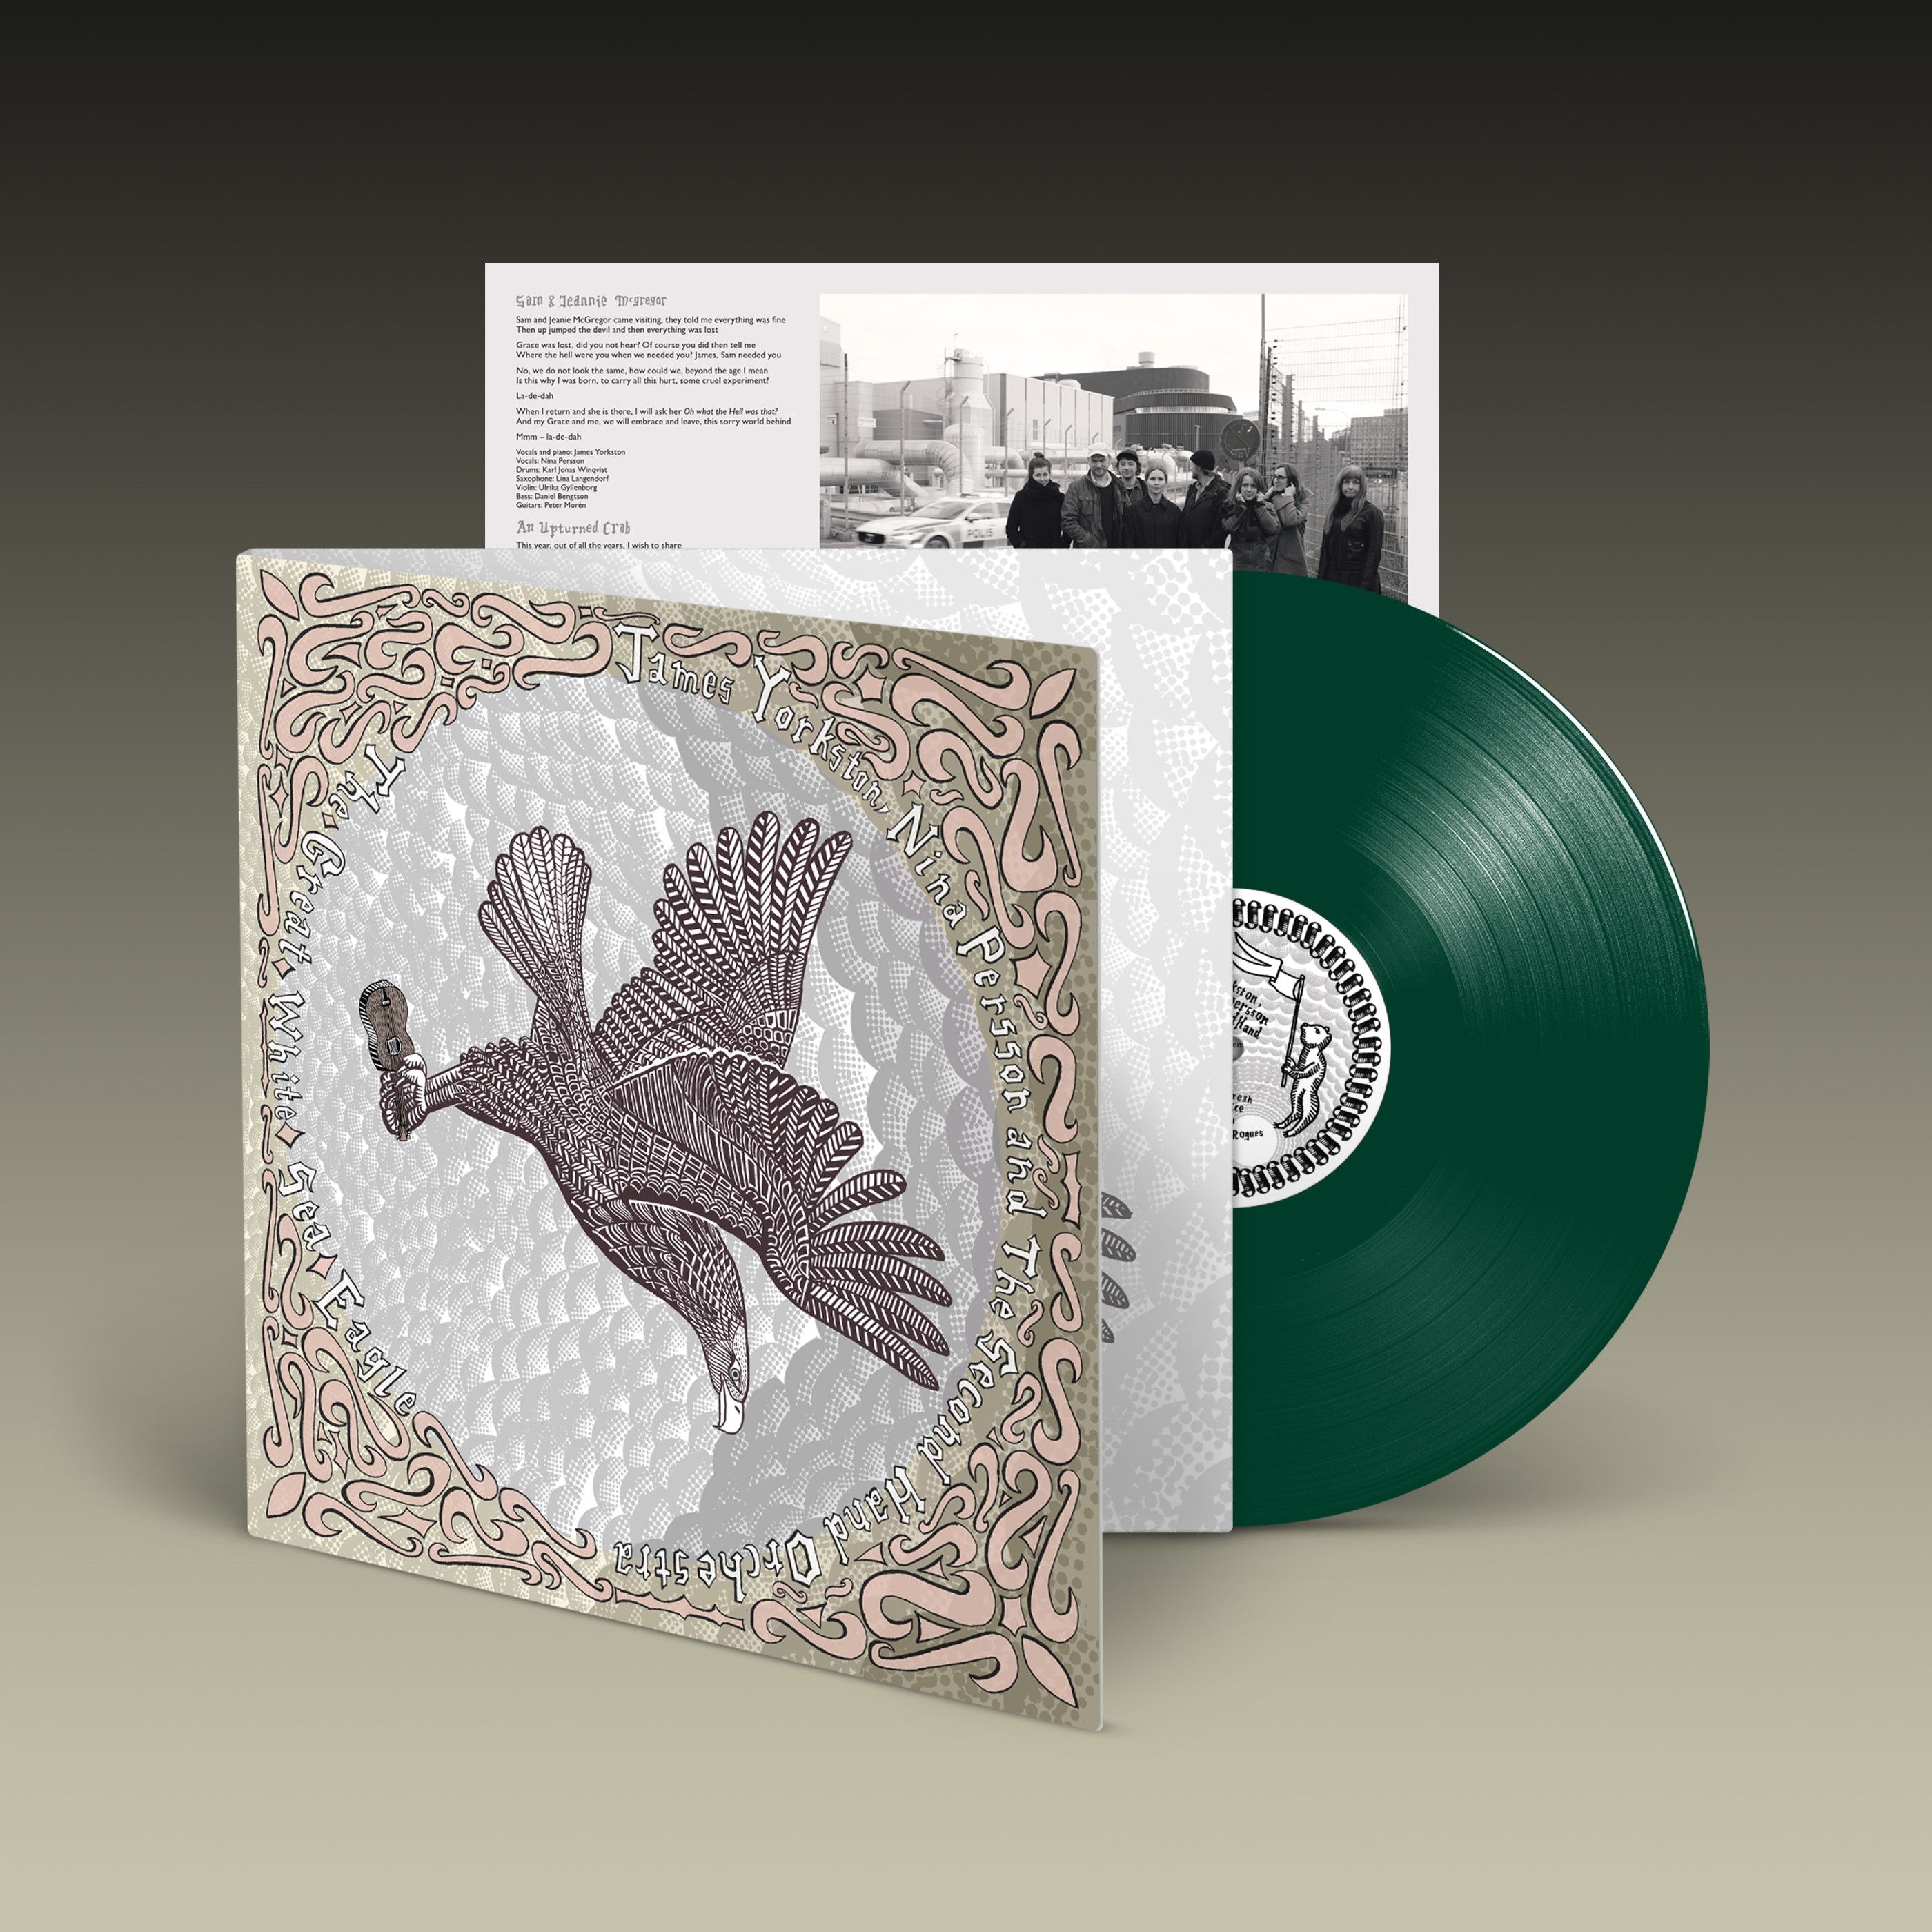 James Yorkston, Nina Persson, The Second Hand Orchestra - The Great White Sea Eagle: Limited Dark Green Vinyl LP